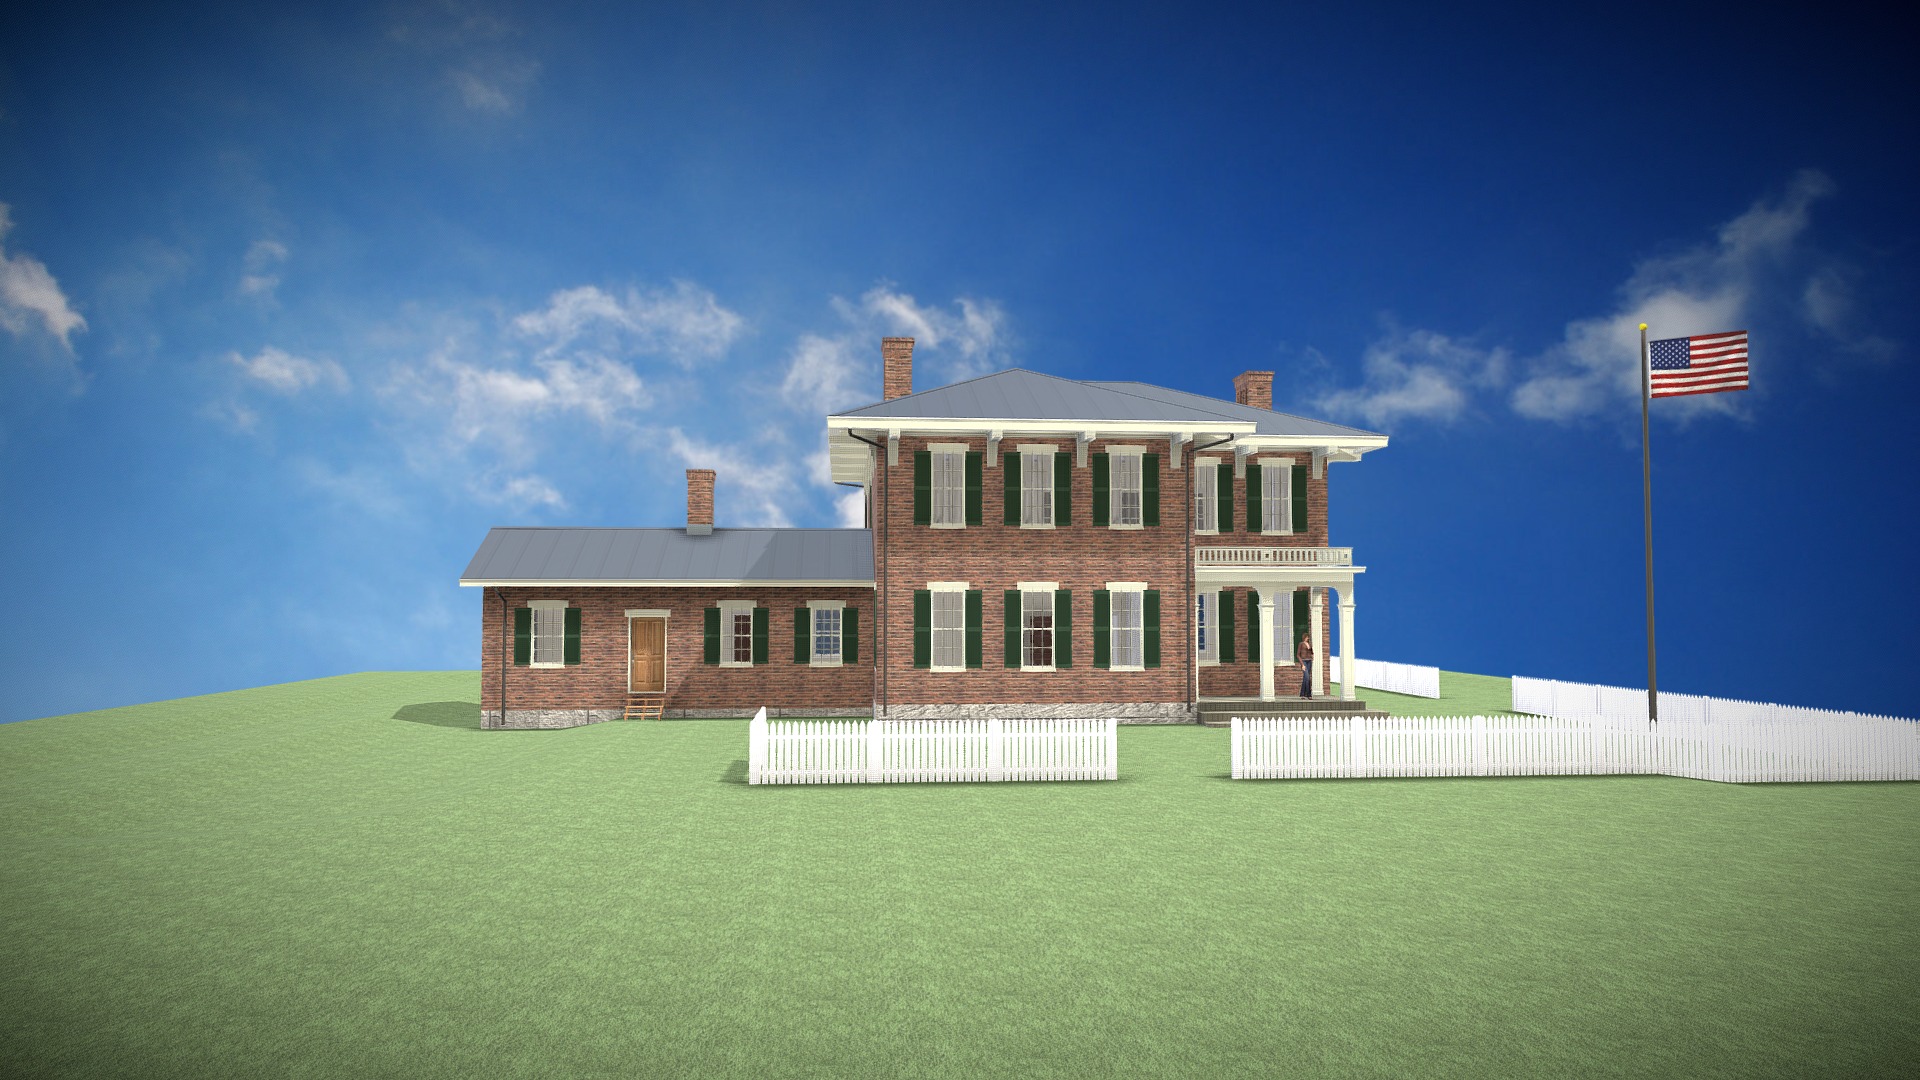 3D model Ulysses S. Grant Home - This is a 3D model of the Ulysses S. Grant Home. The 3D model is about a large brick house with a flag on the front.